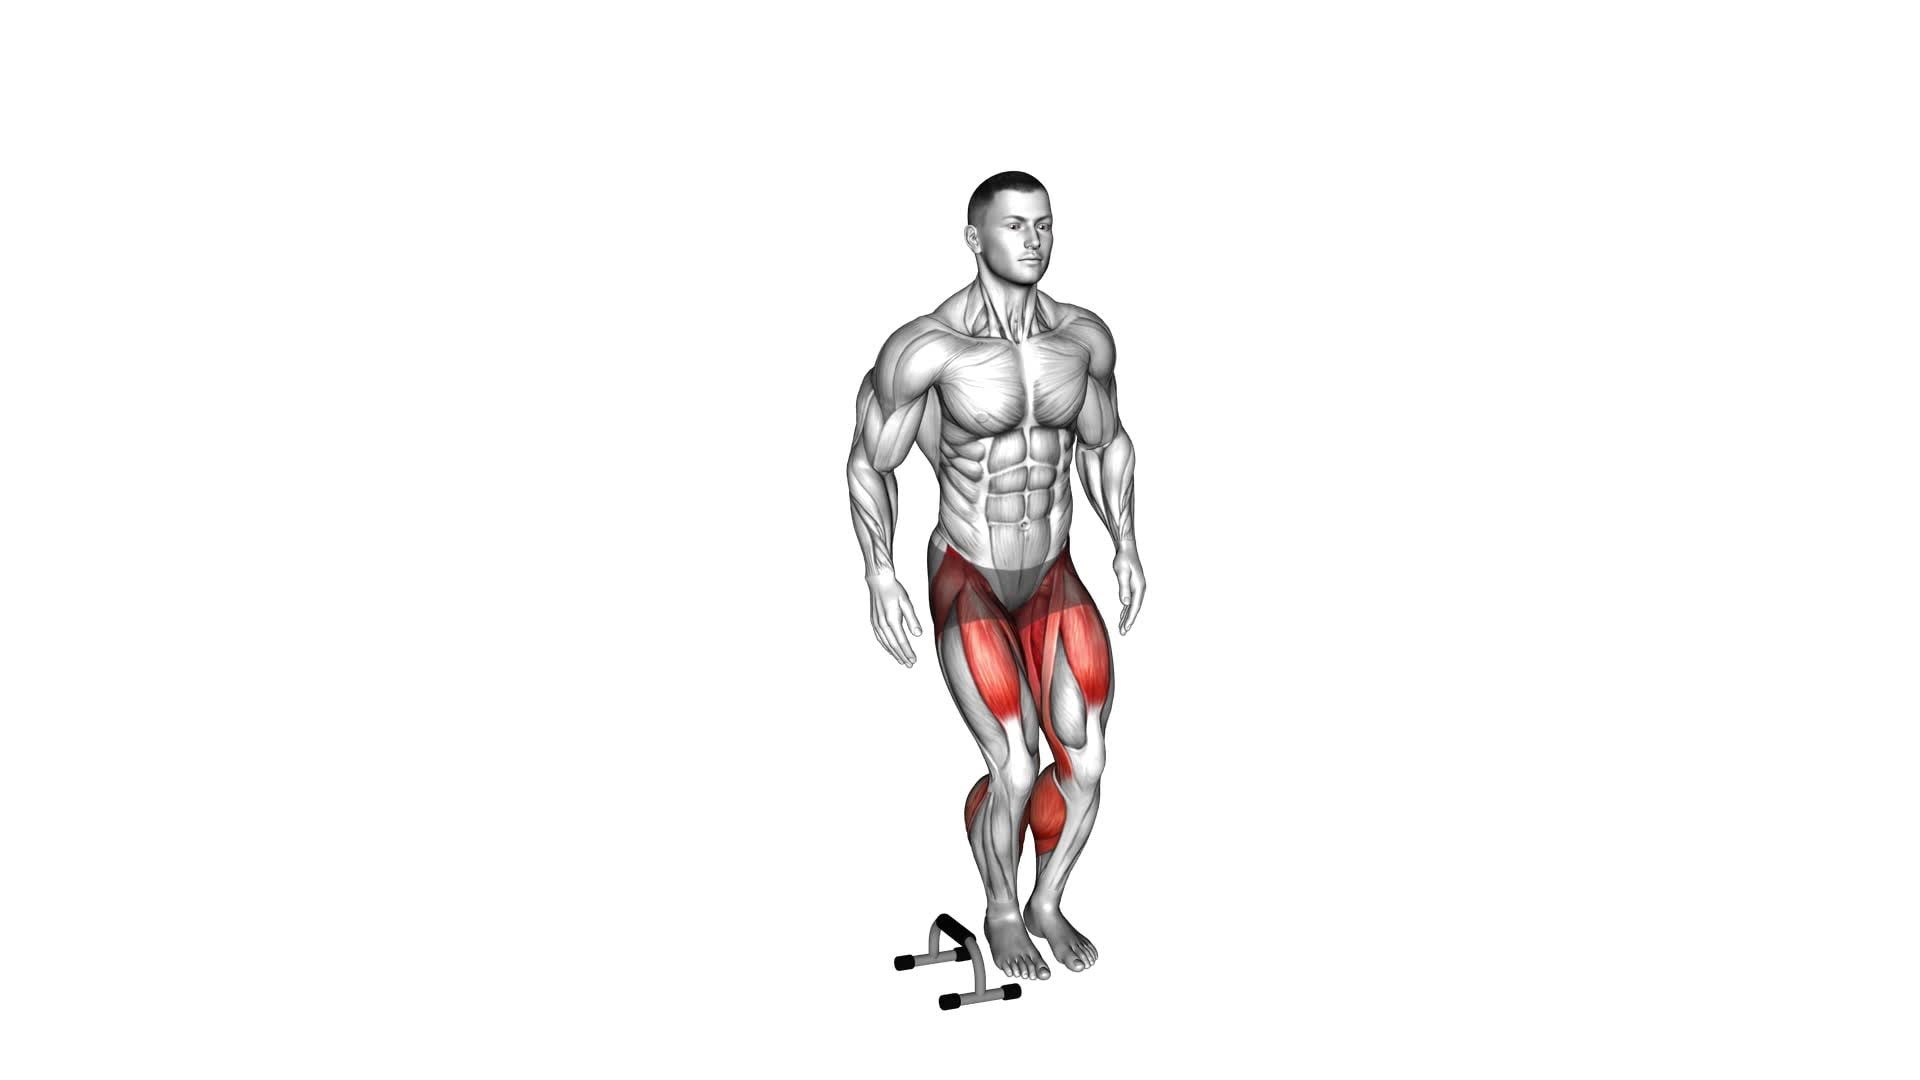 Lateral Hurdle Jump (male) - Video Exercise Guide & Tips